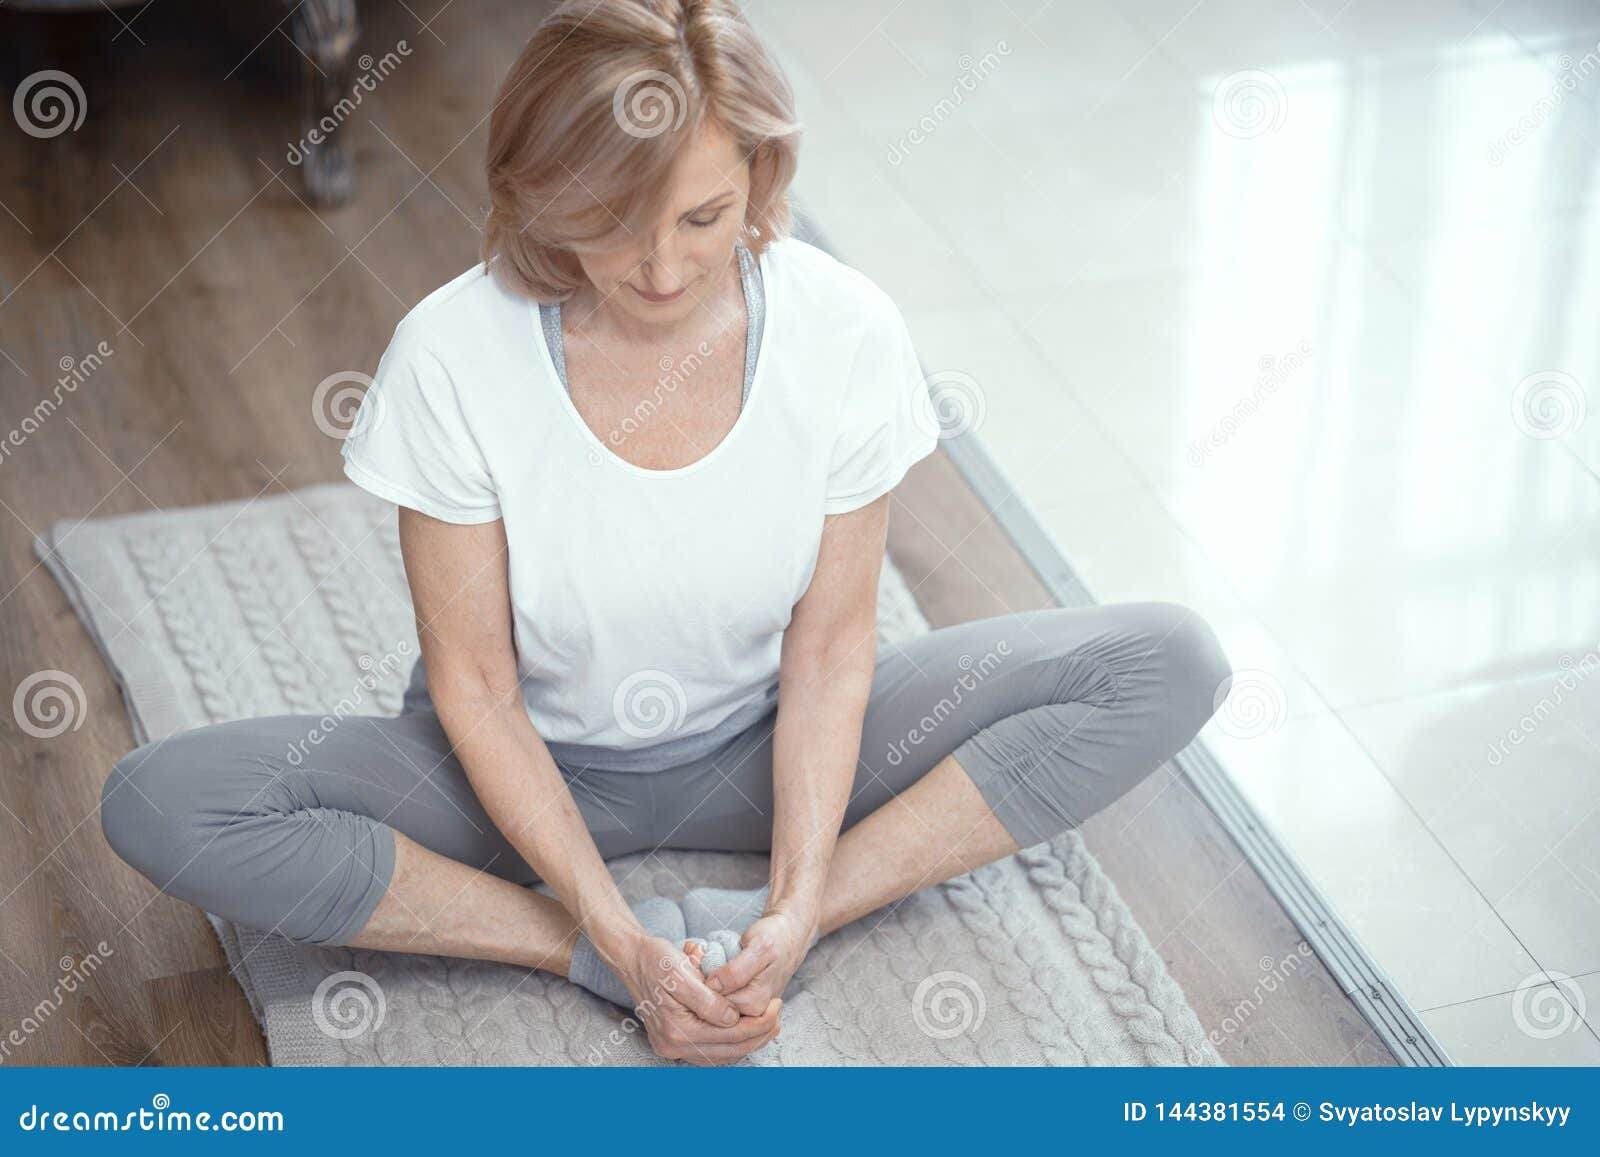 Picture Knee highs Nikki Pose young woman Legs Sweater Sitting Wing